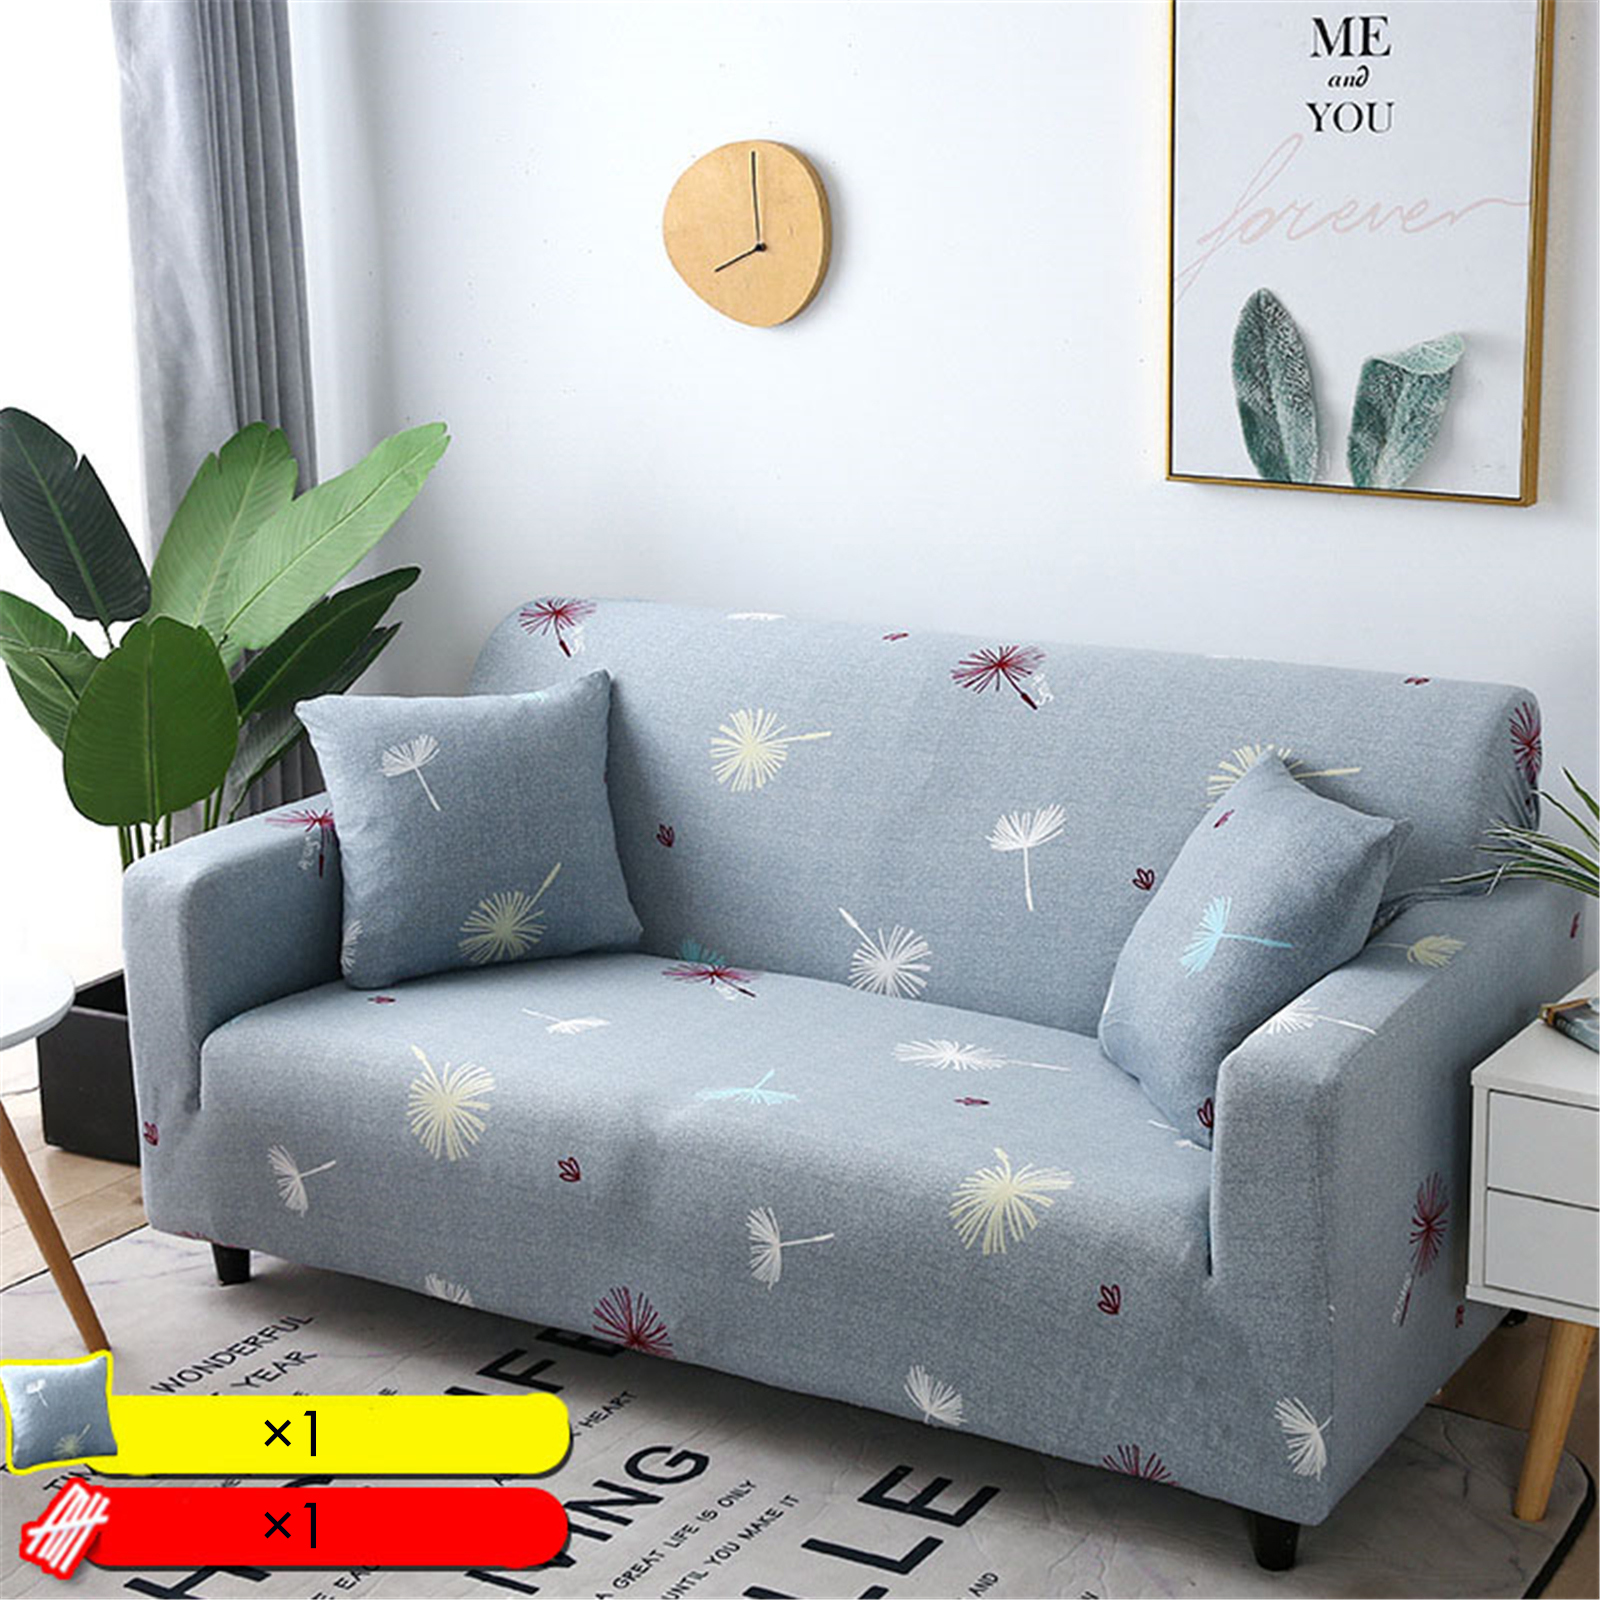 Fuwatacchi Cat Rabbit Printed Sofa Cover Chaise Longue Couch Covers  Loveseat Armchair Baby Bedding Comfort Bench Chair Throws